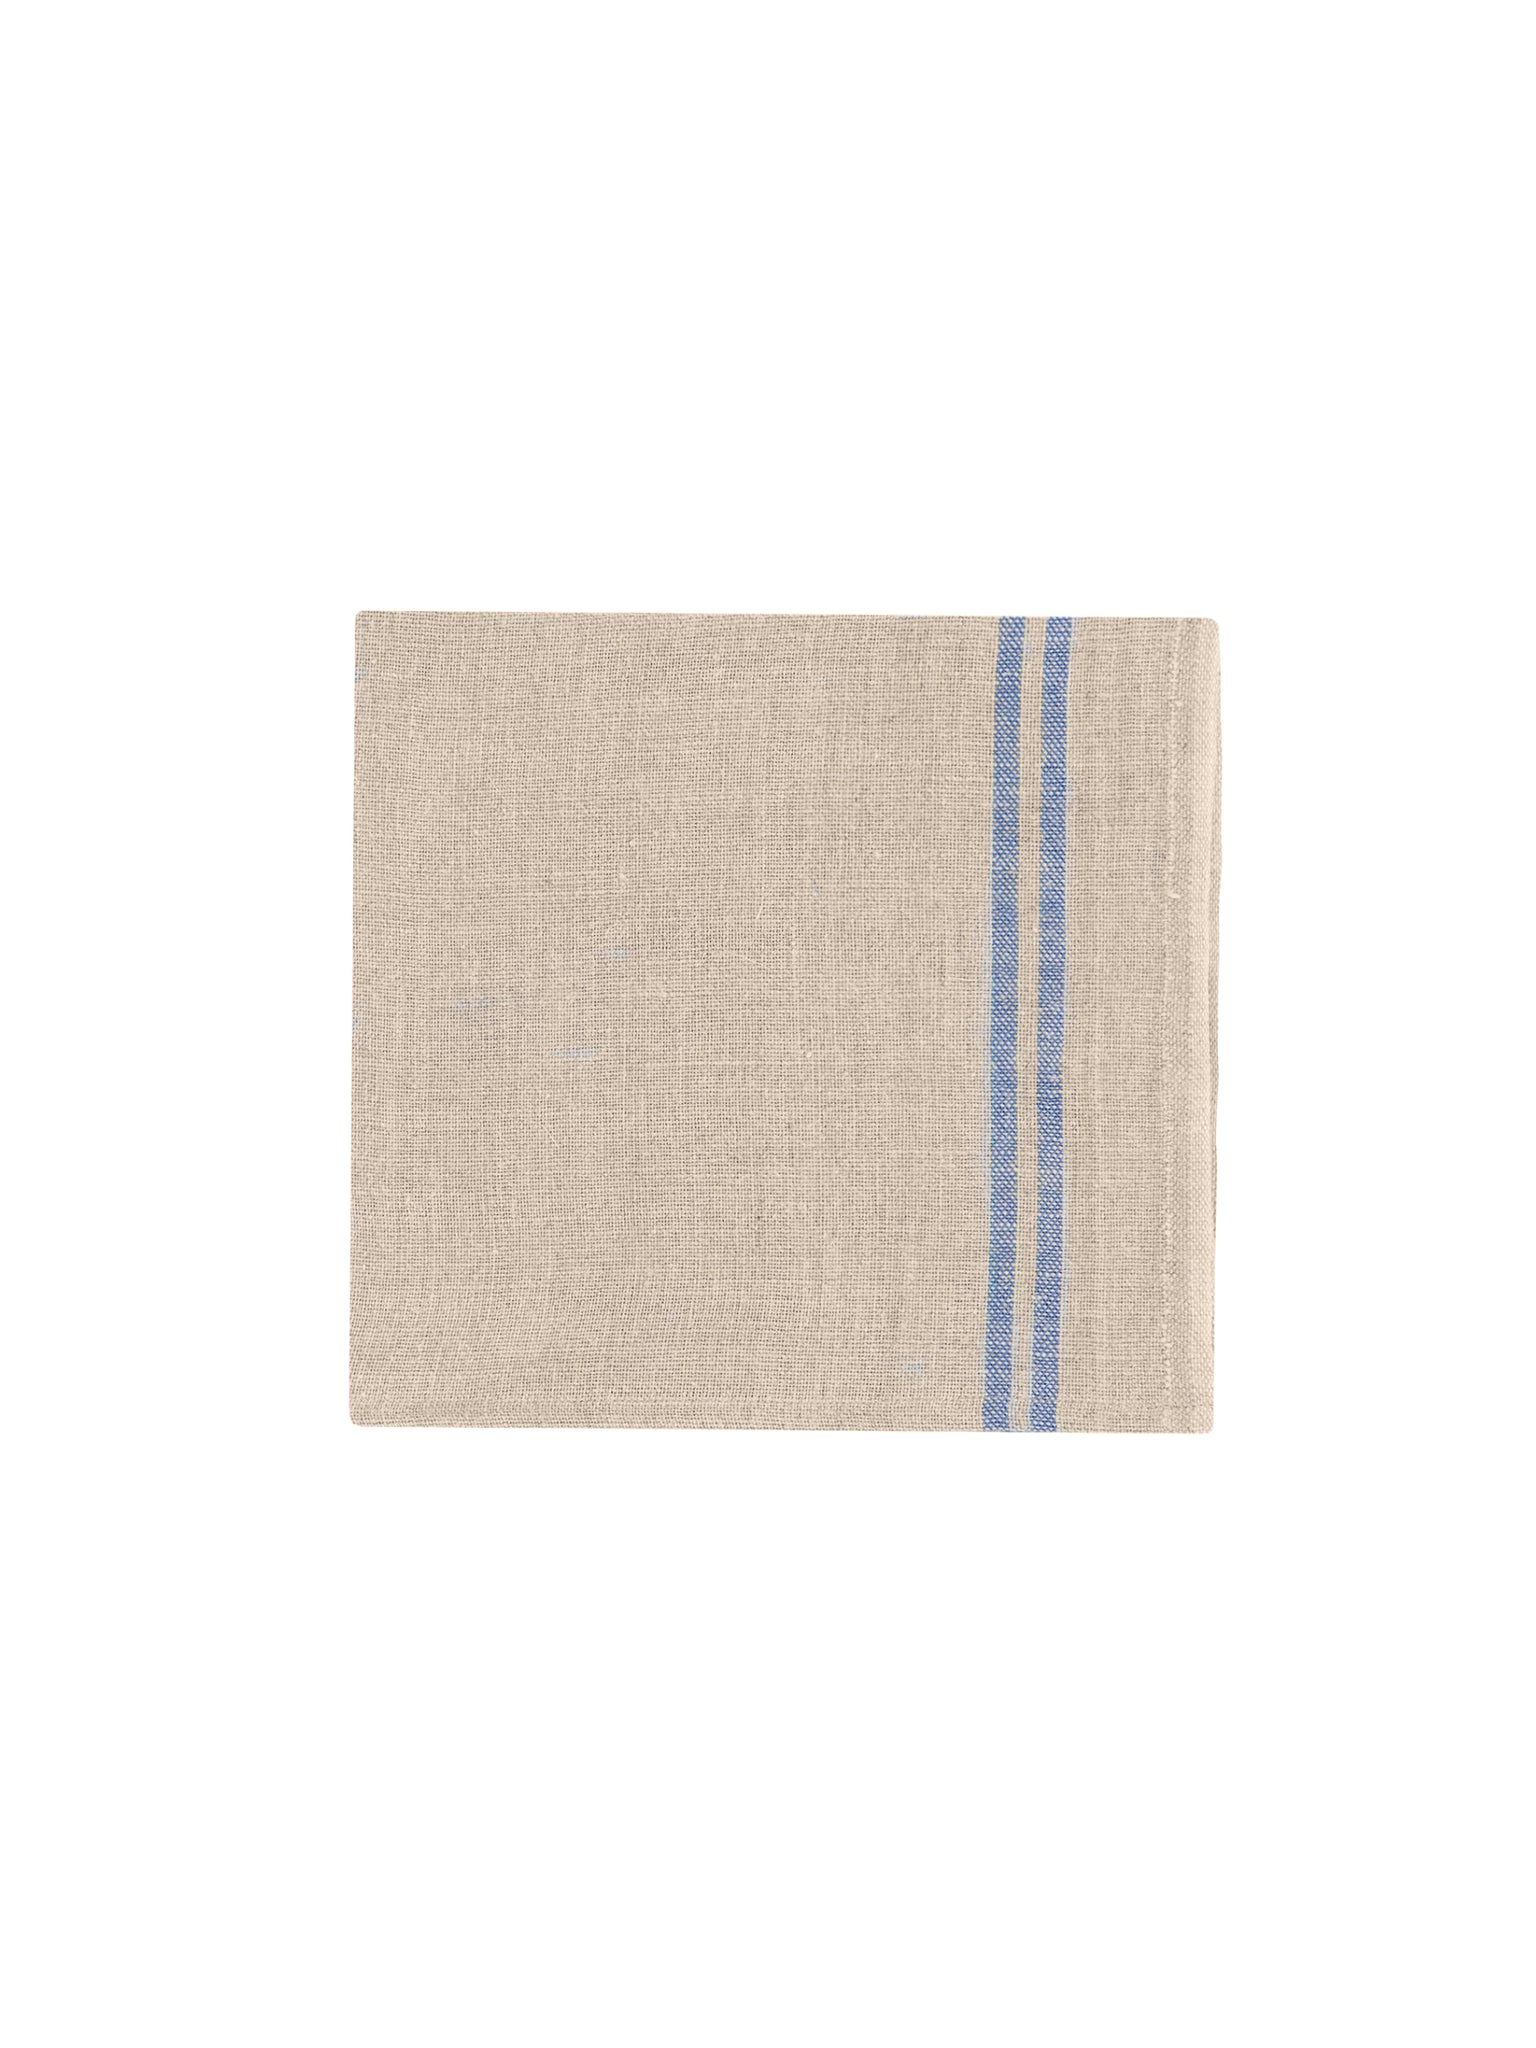 Charvet Editions Country Linen Collection Blue Napkins Weston Table